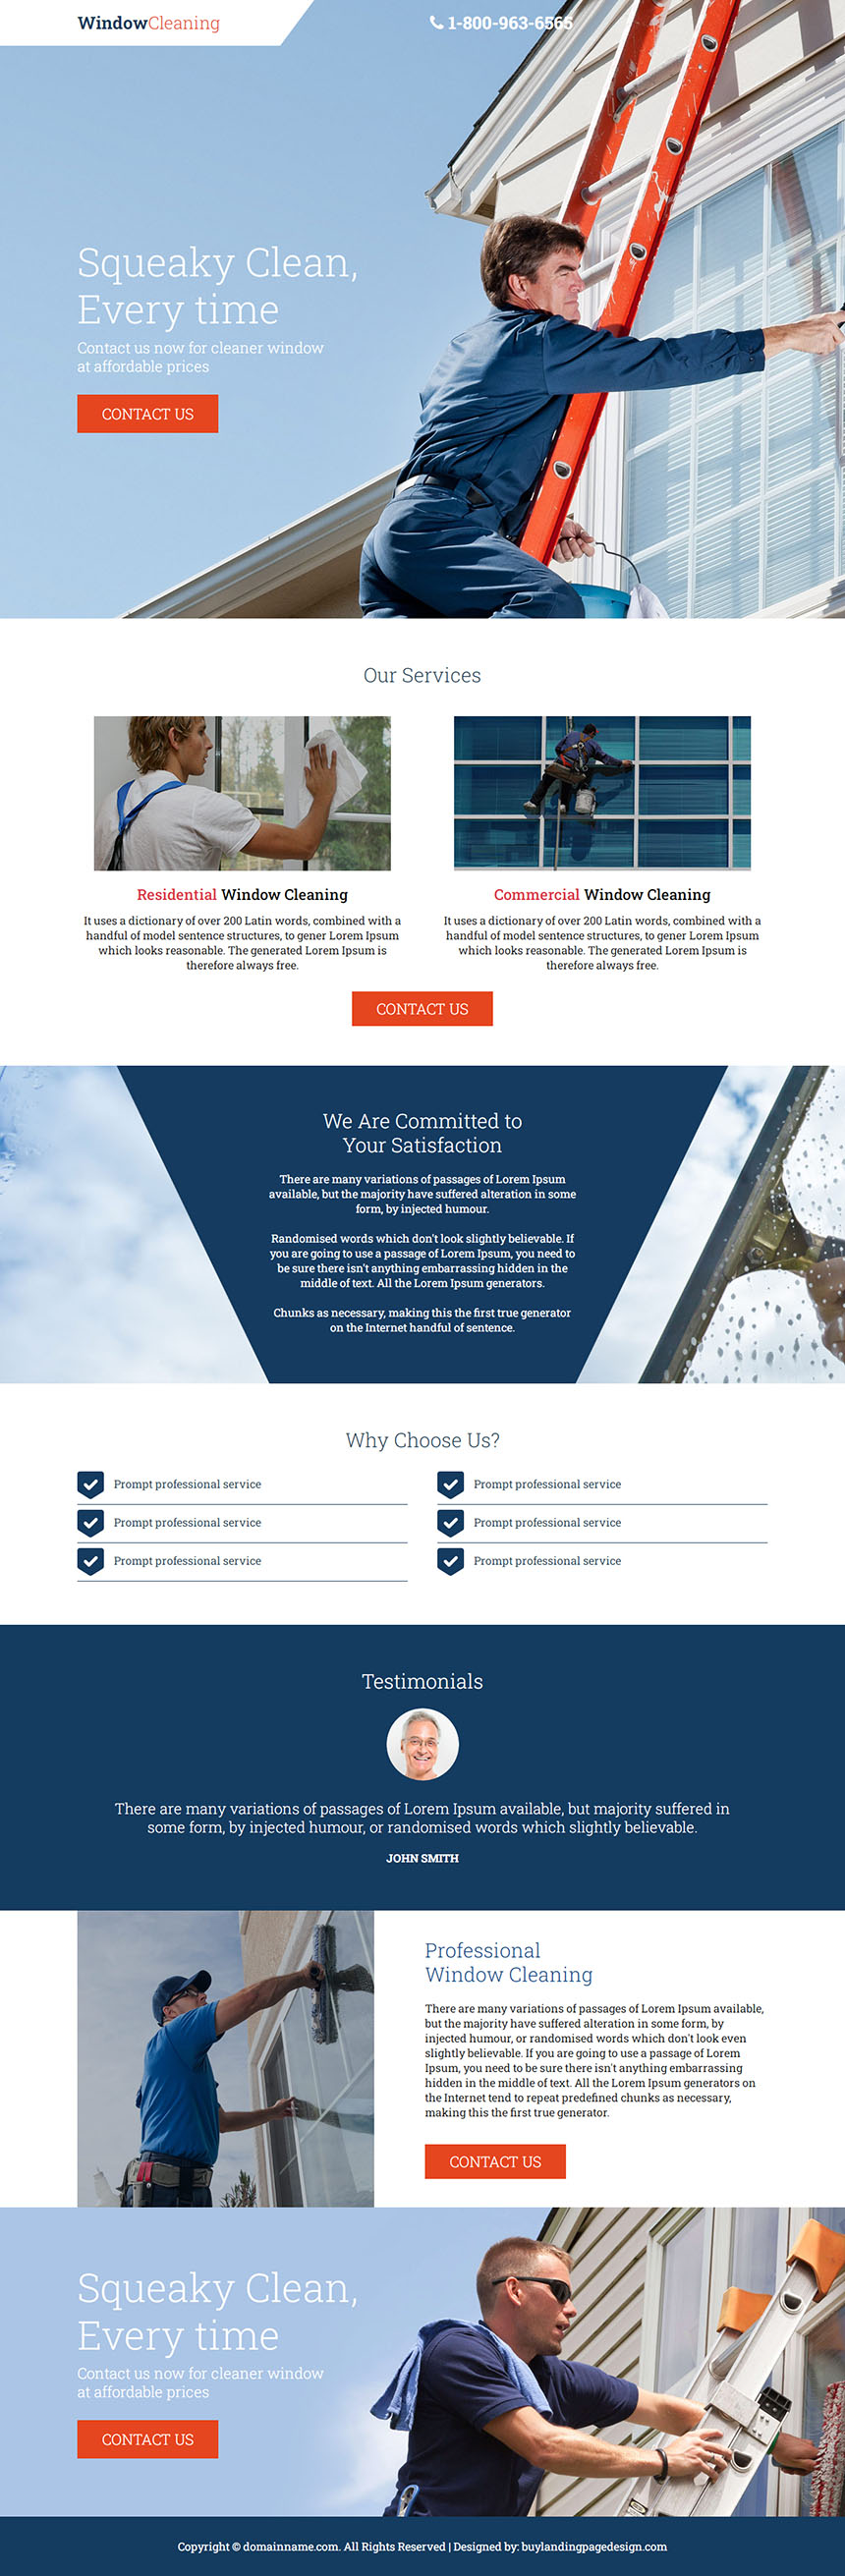 window cleaning service lead capture landing page